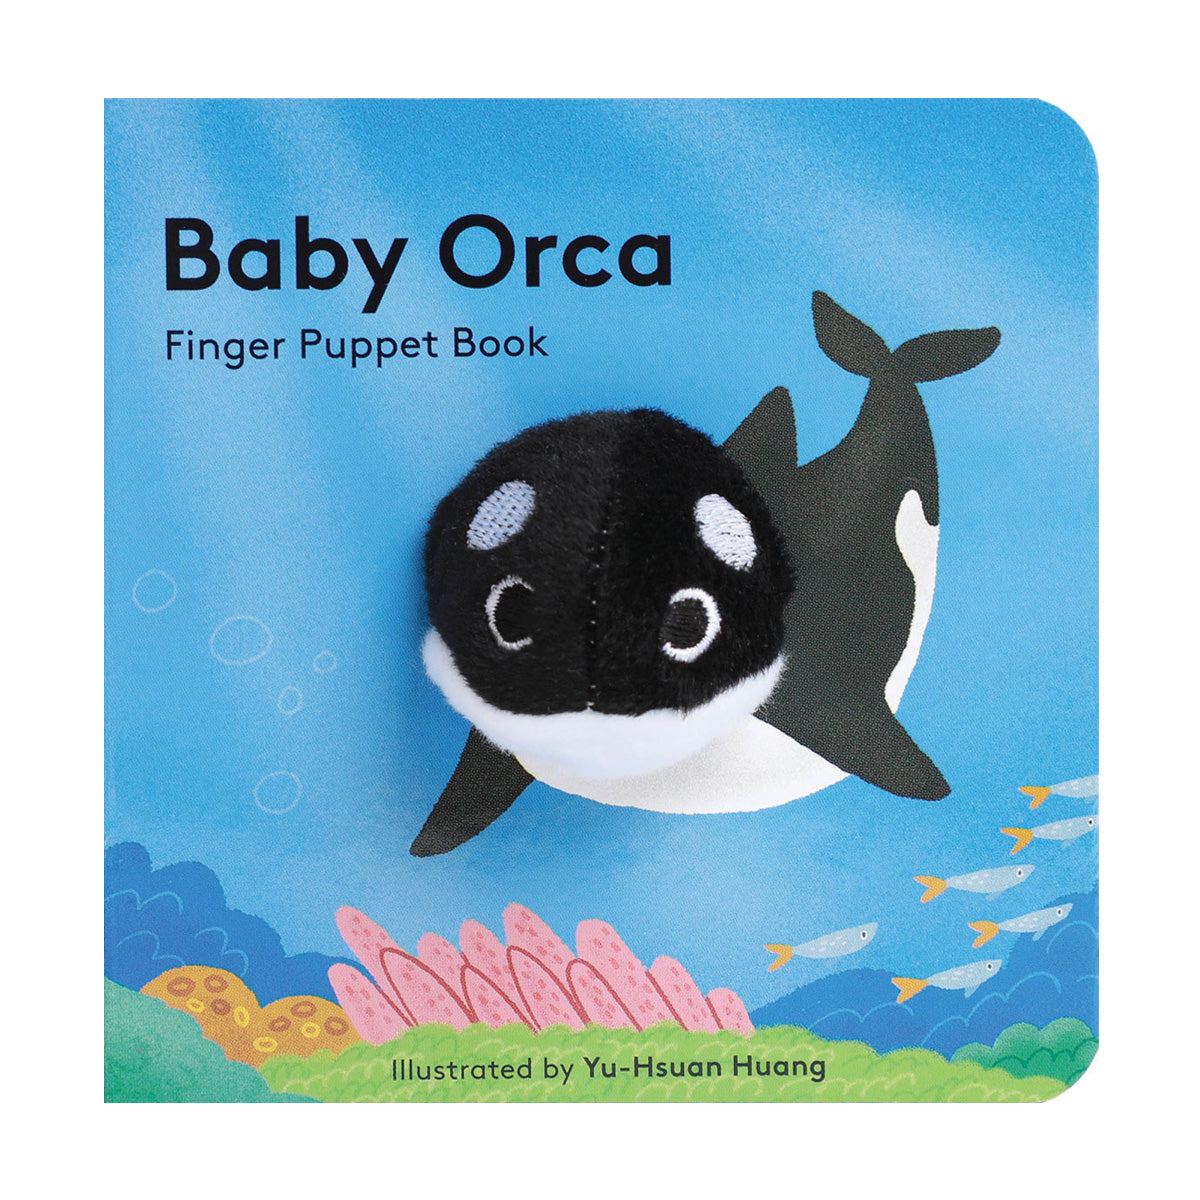 Puppet baby orca book